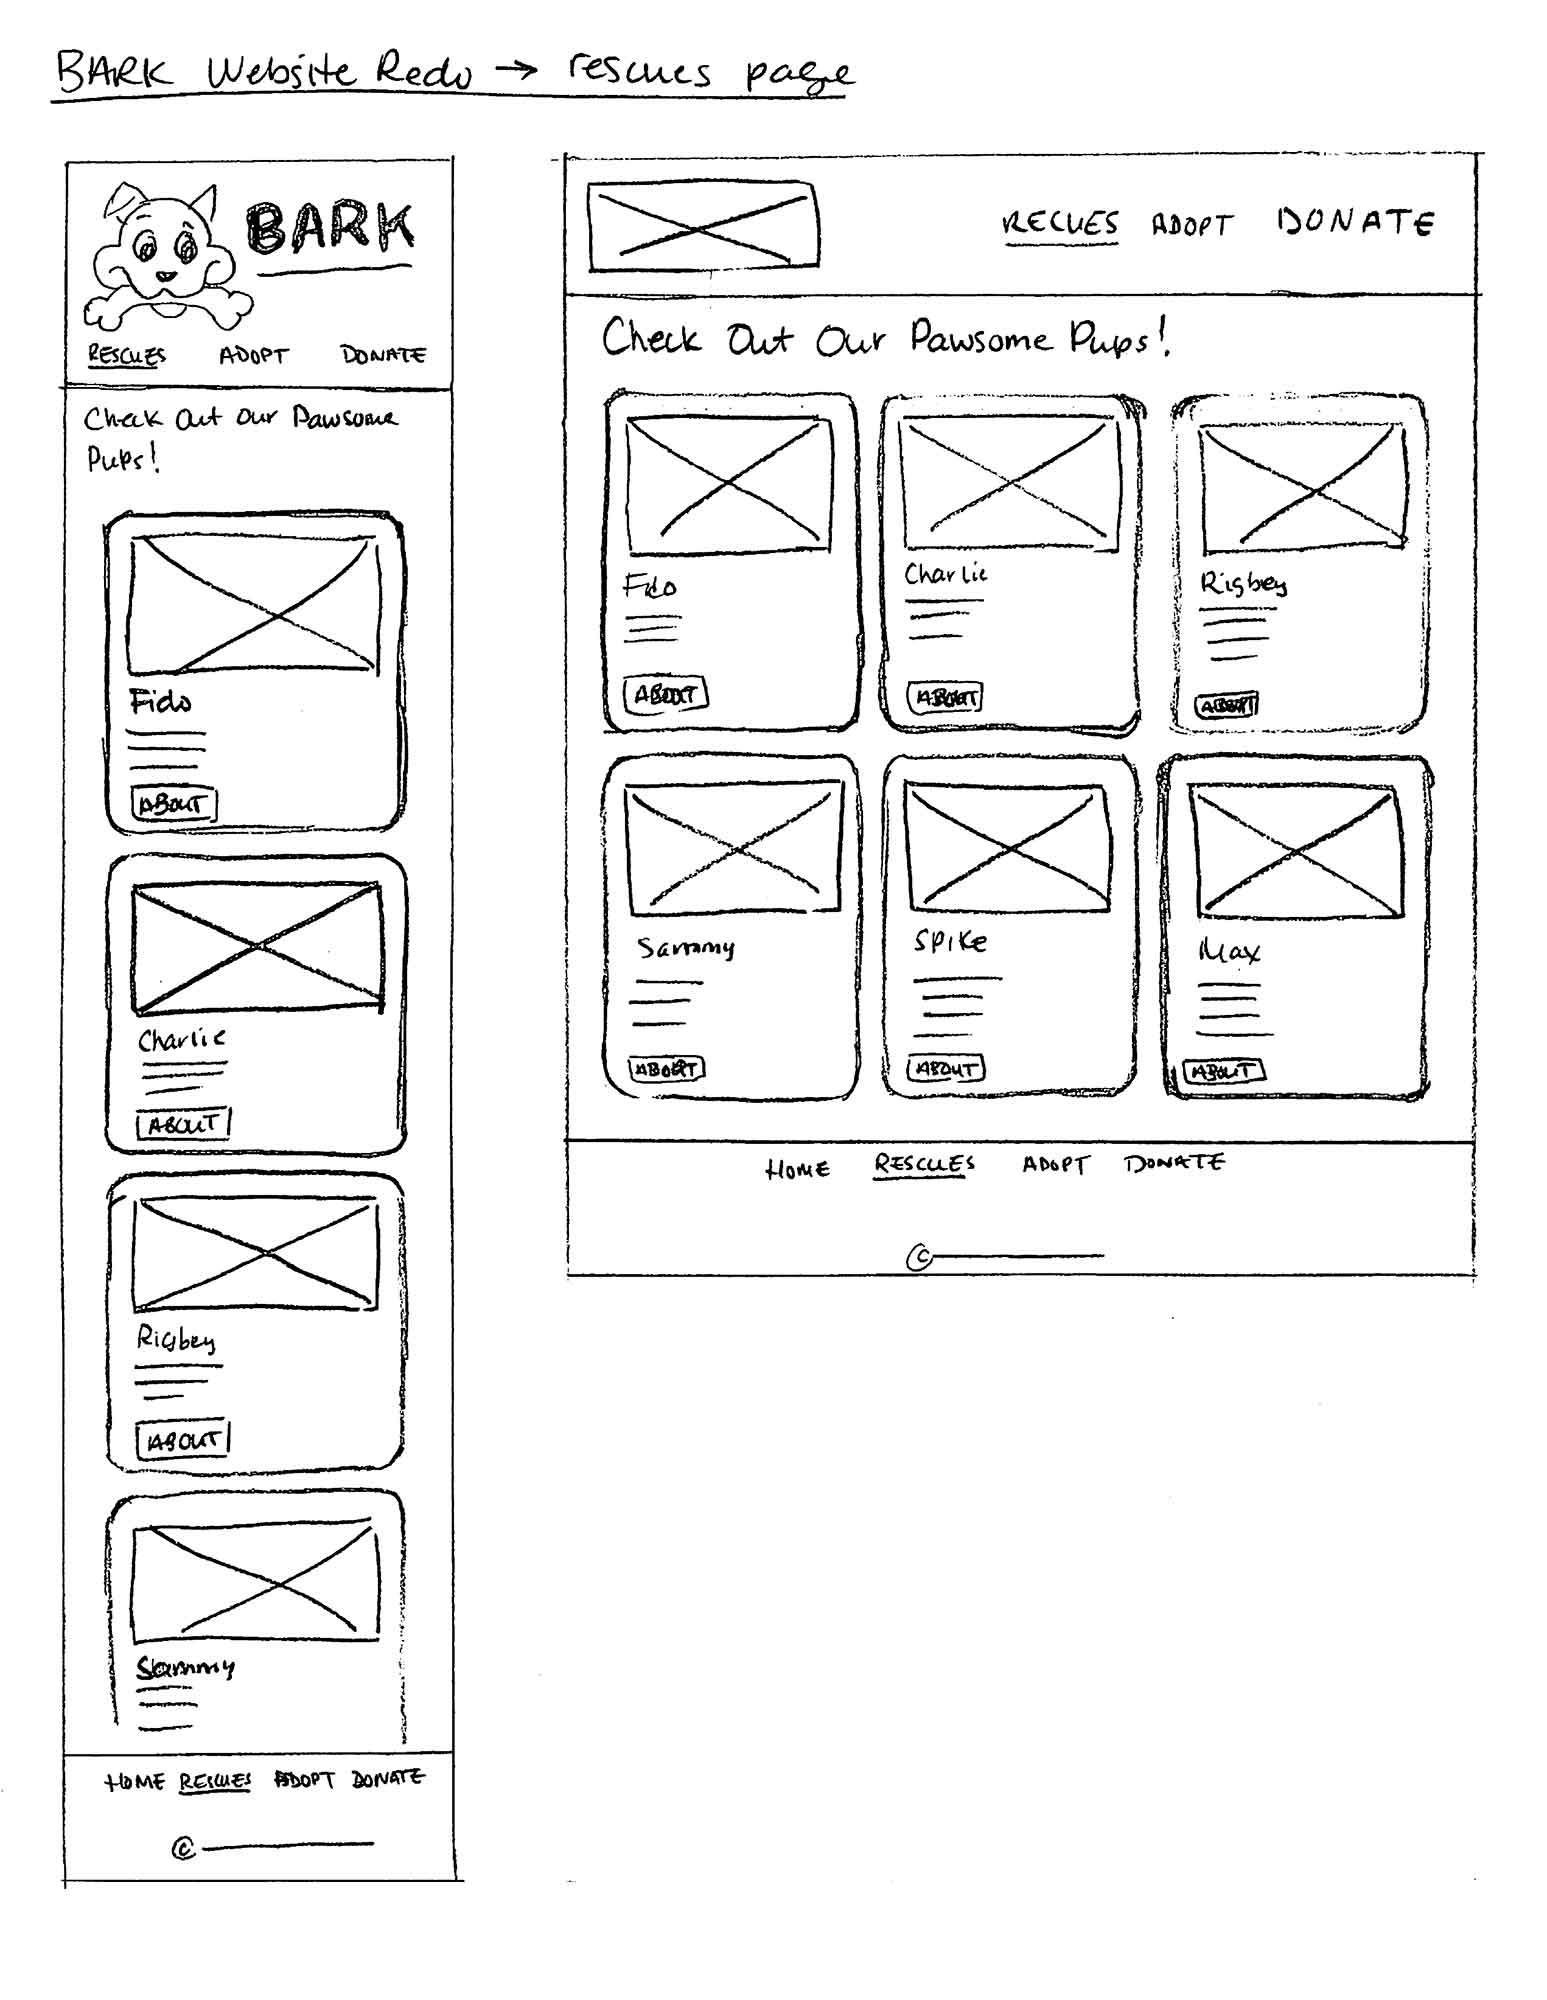 This is an image of the website wireframes. This is the layout for the available rescues page across different screen sizes.
